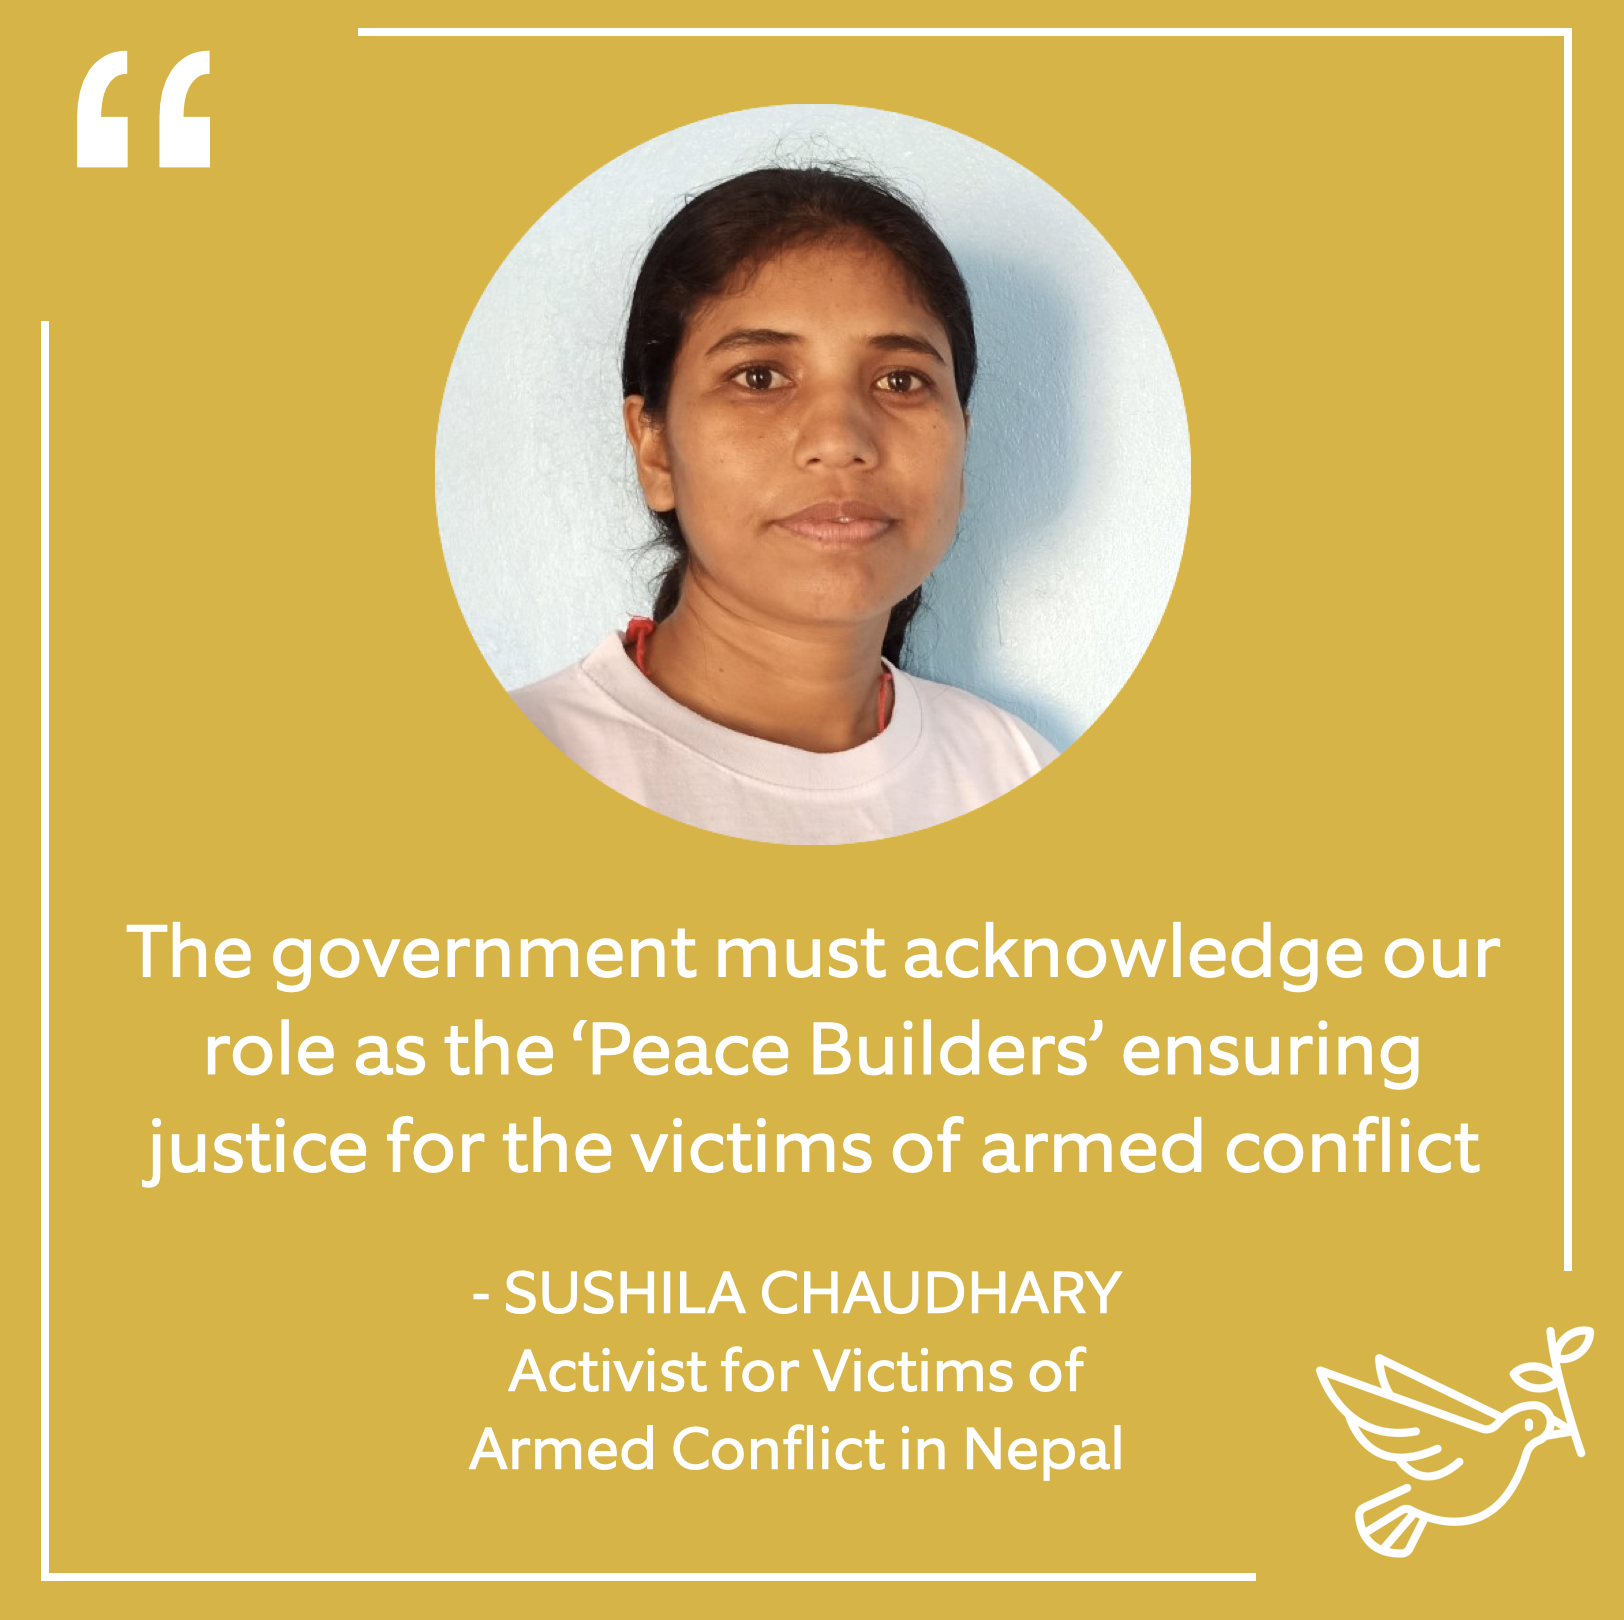 Sushila Chaudhary - Activist for Victims of Armed Conflict in Nepal 